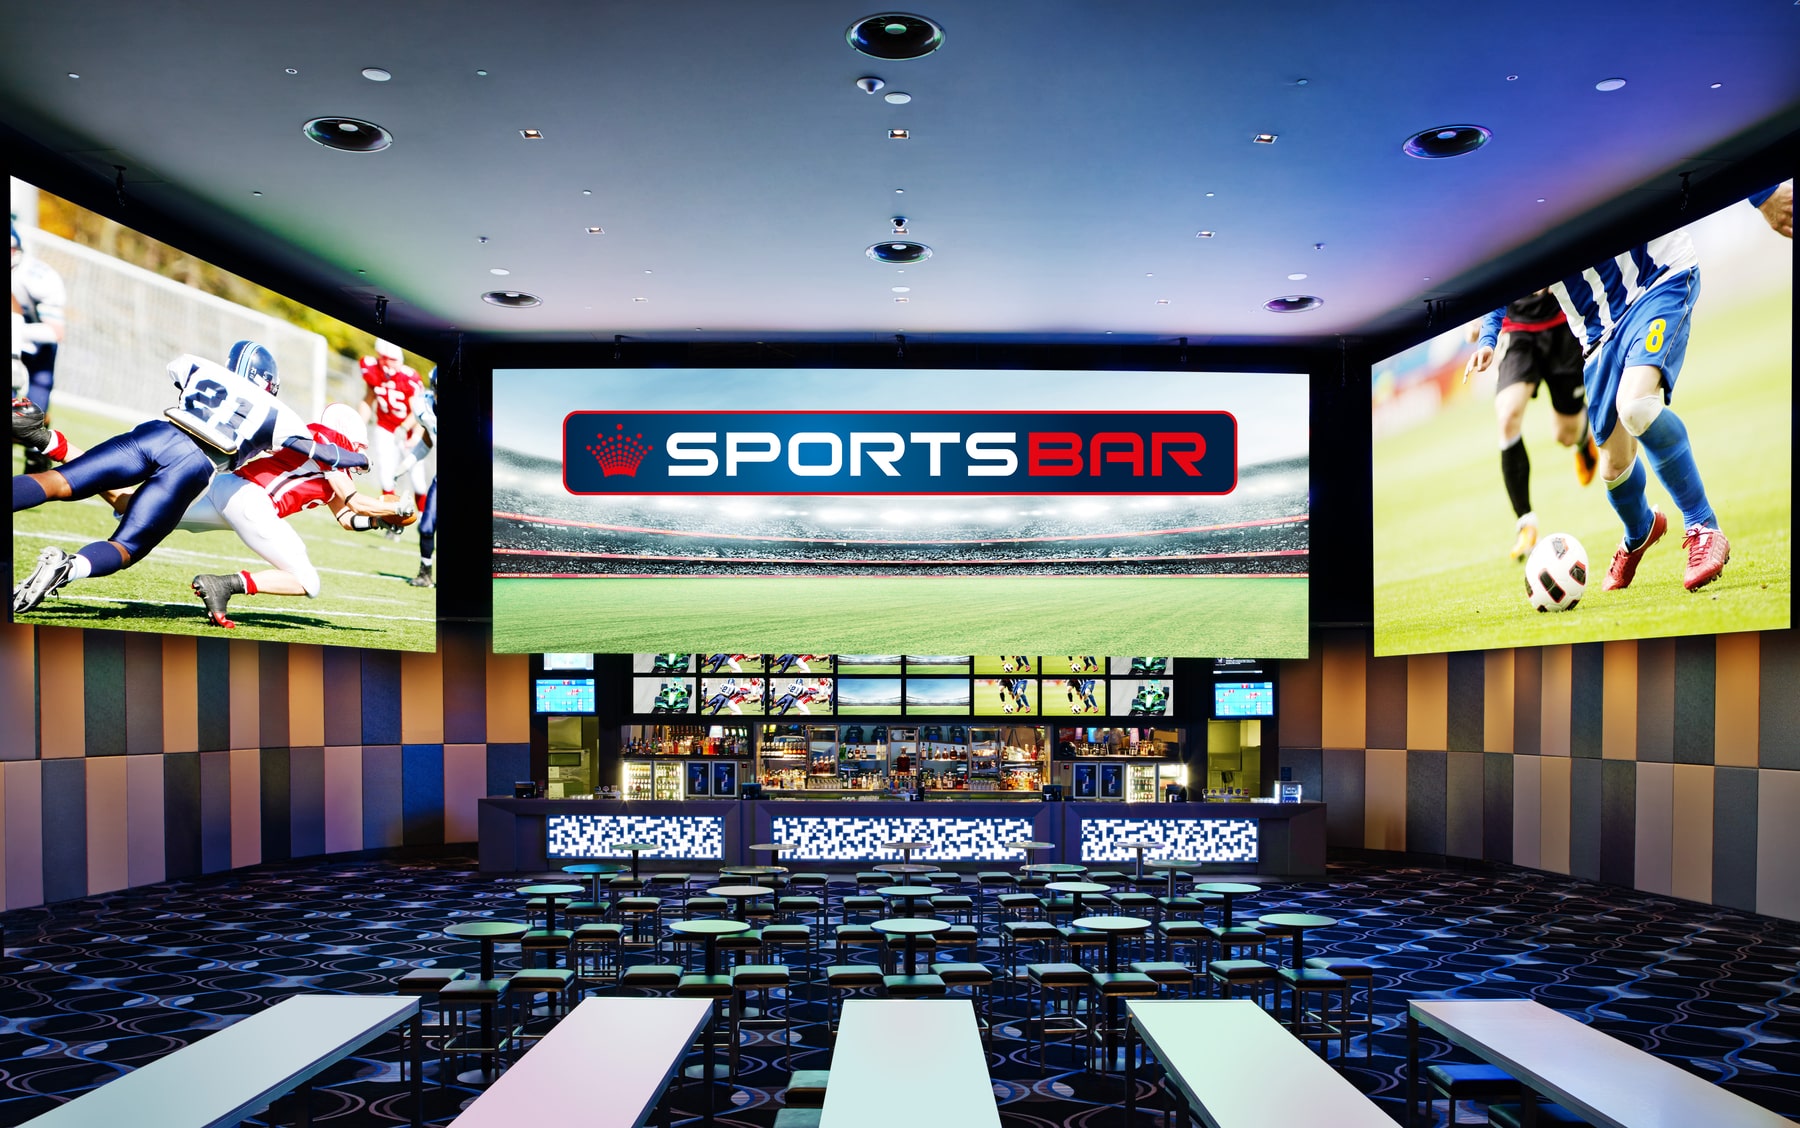 Catch up on sport at the Crown Perths sports bar